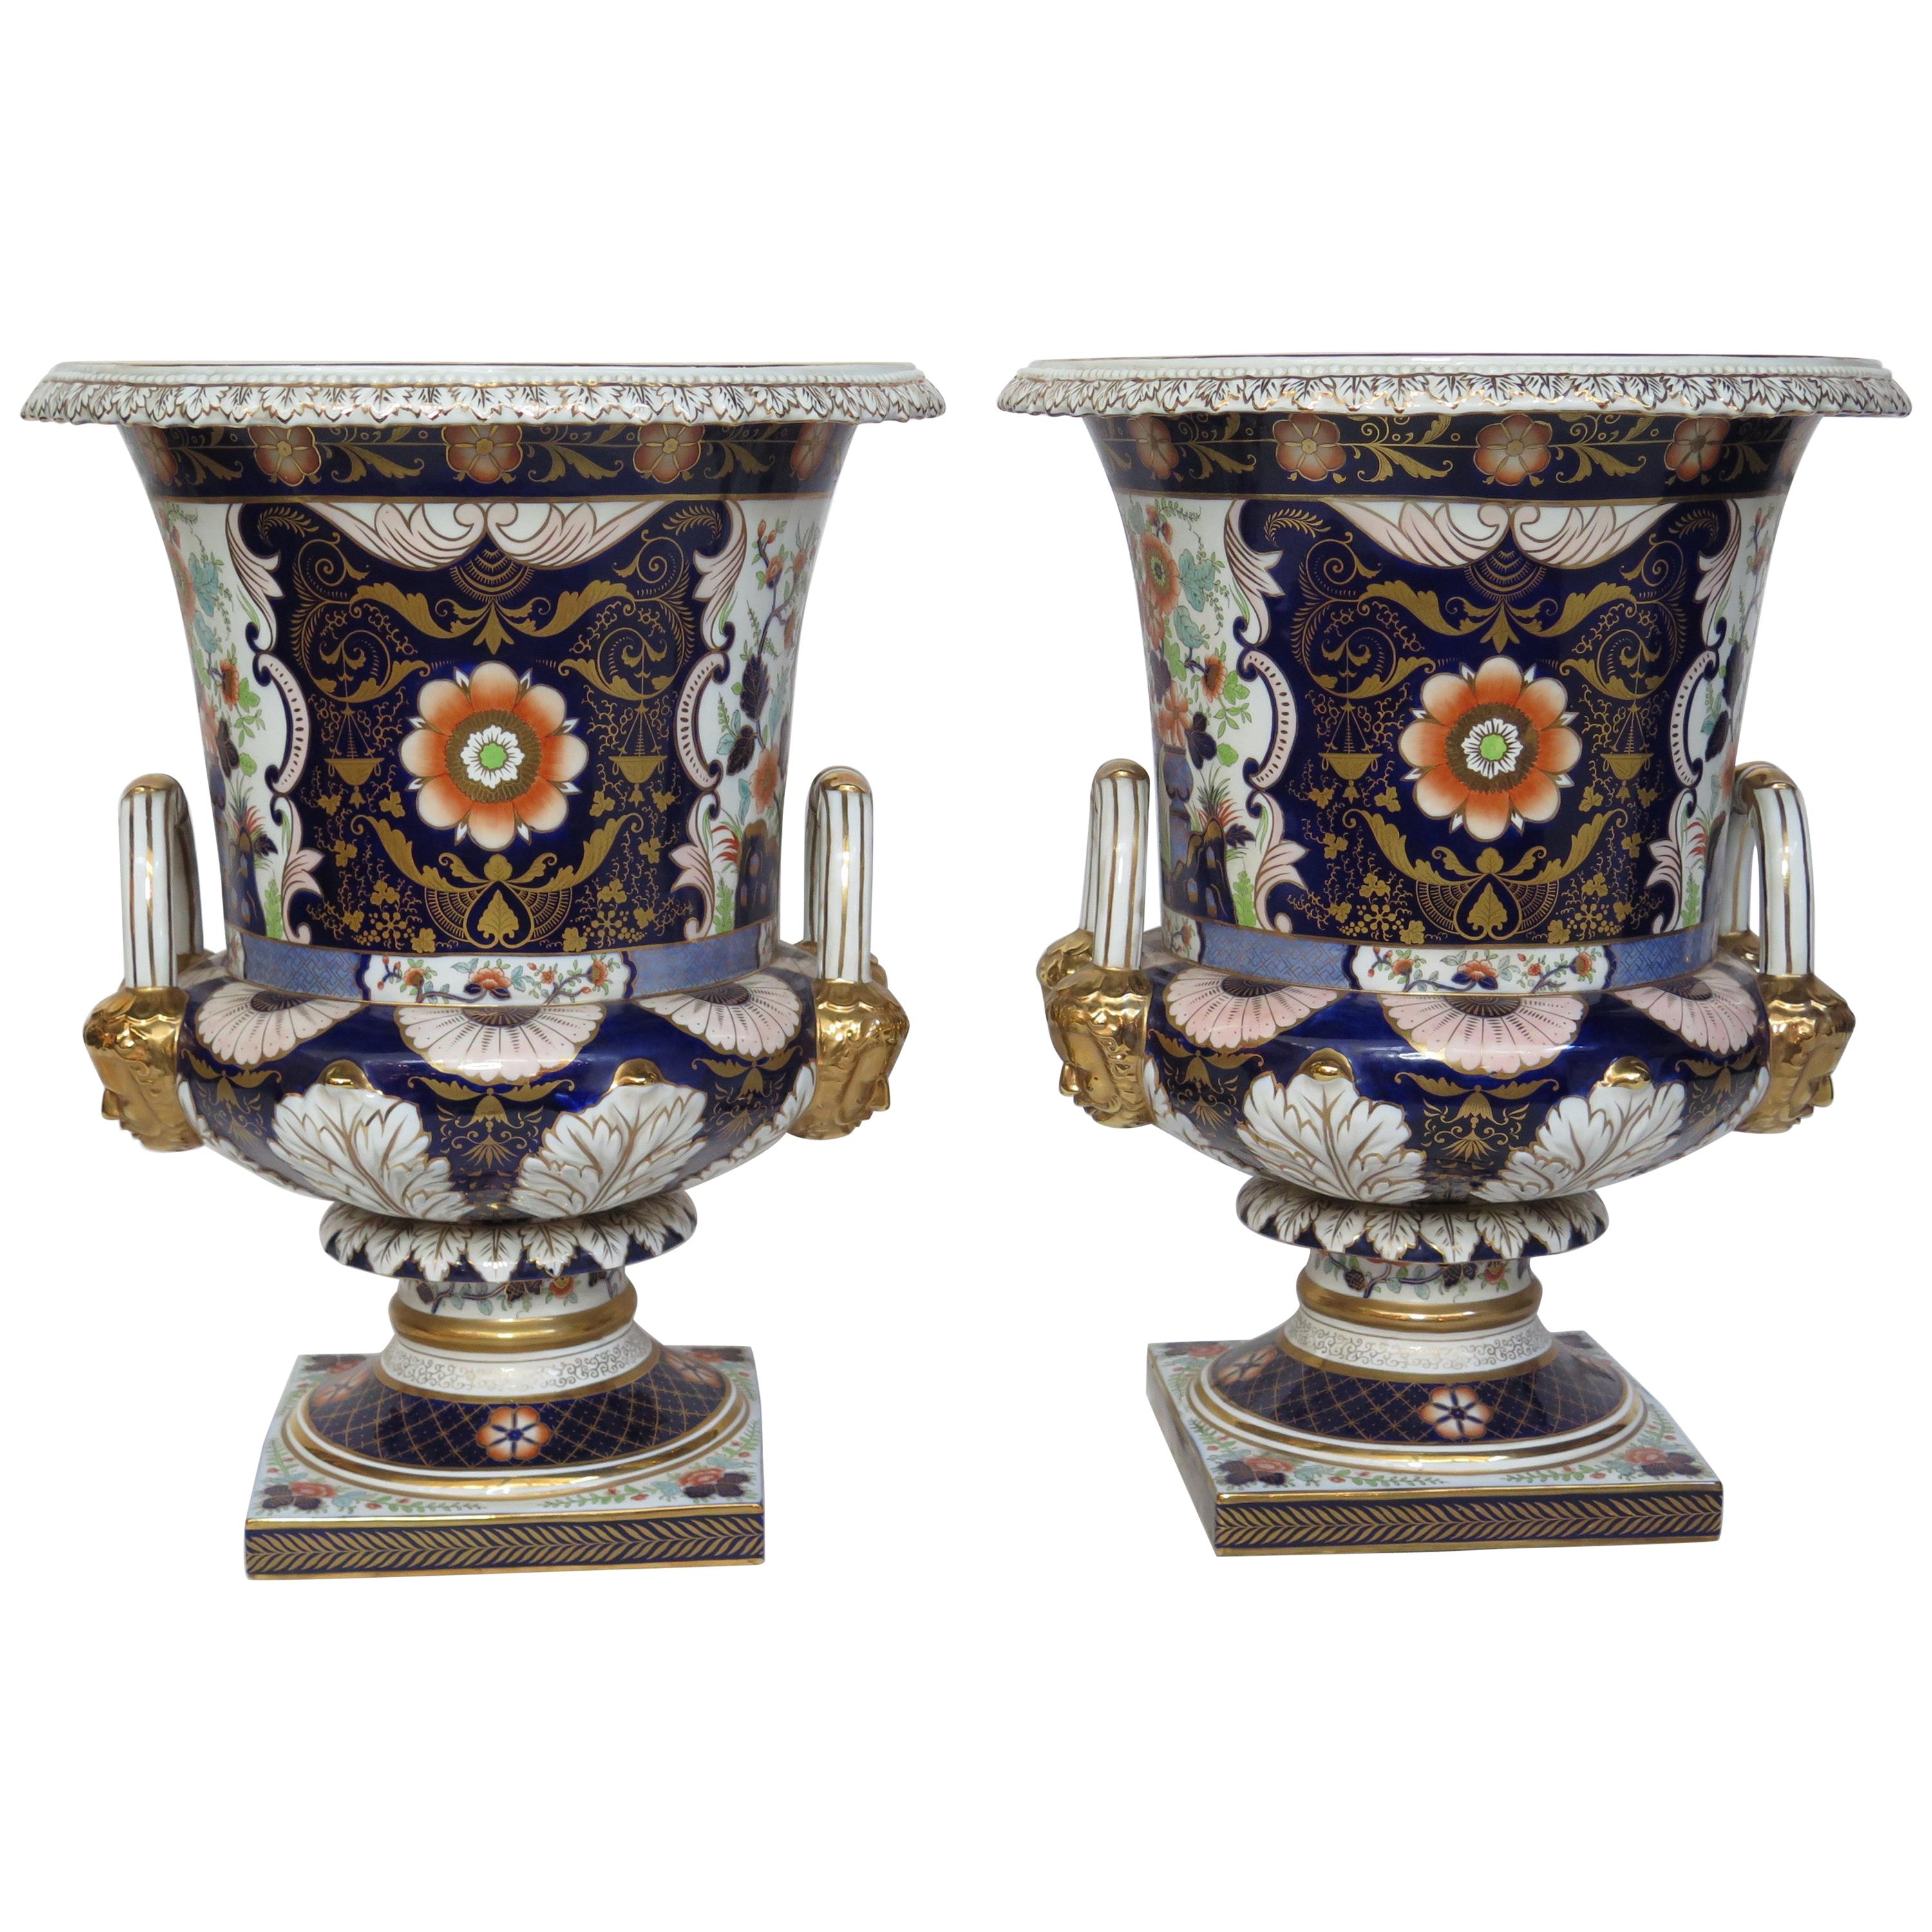 Large Scale Pair of Royal Crown Derby Style Campana Urns